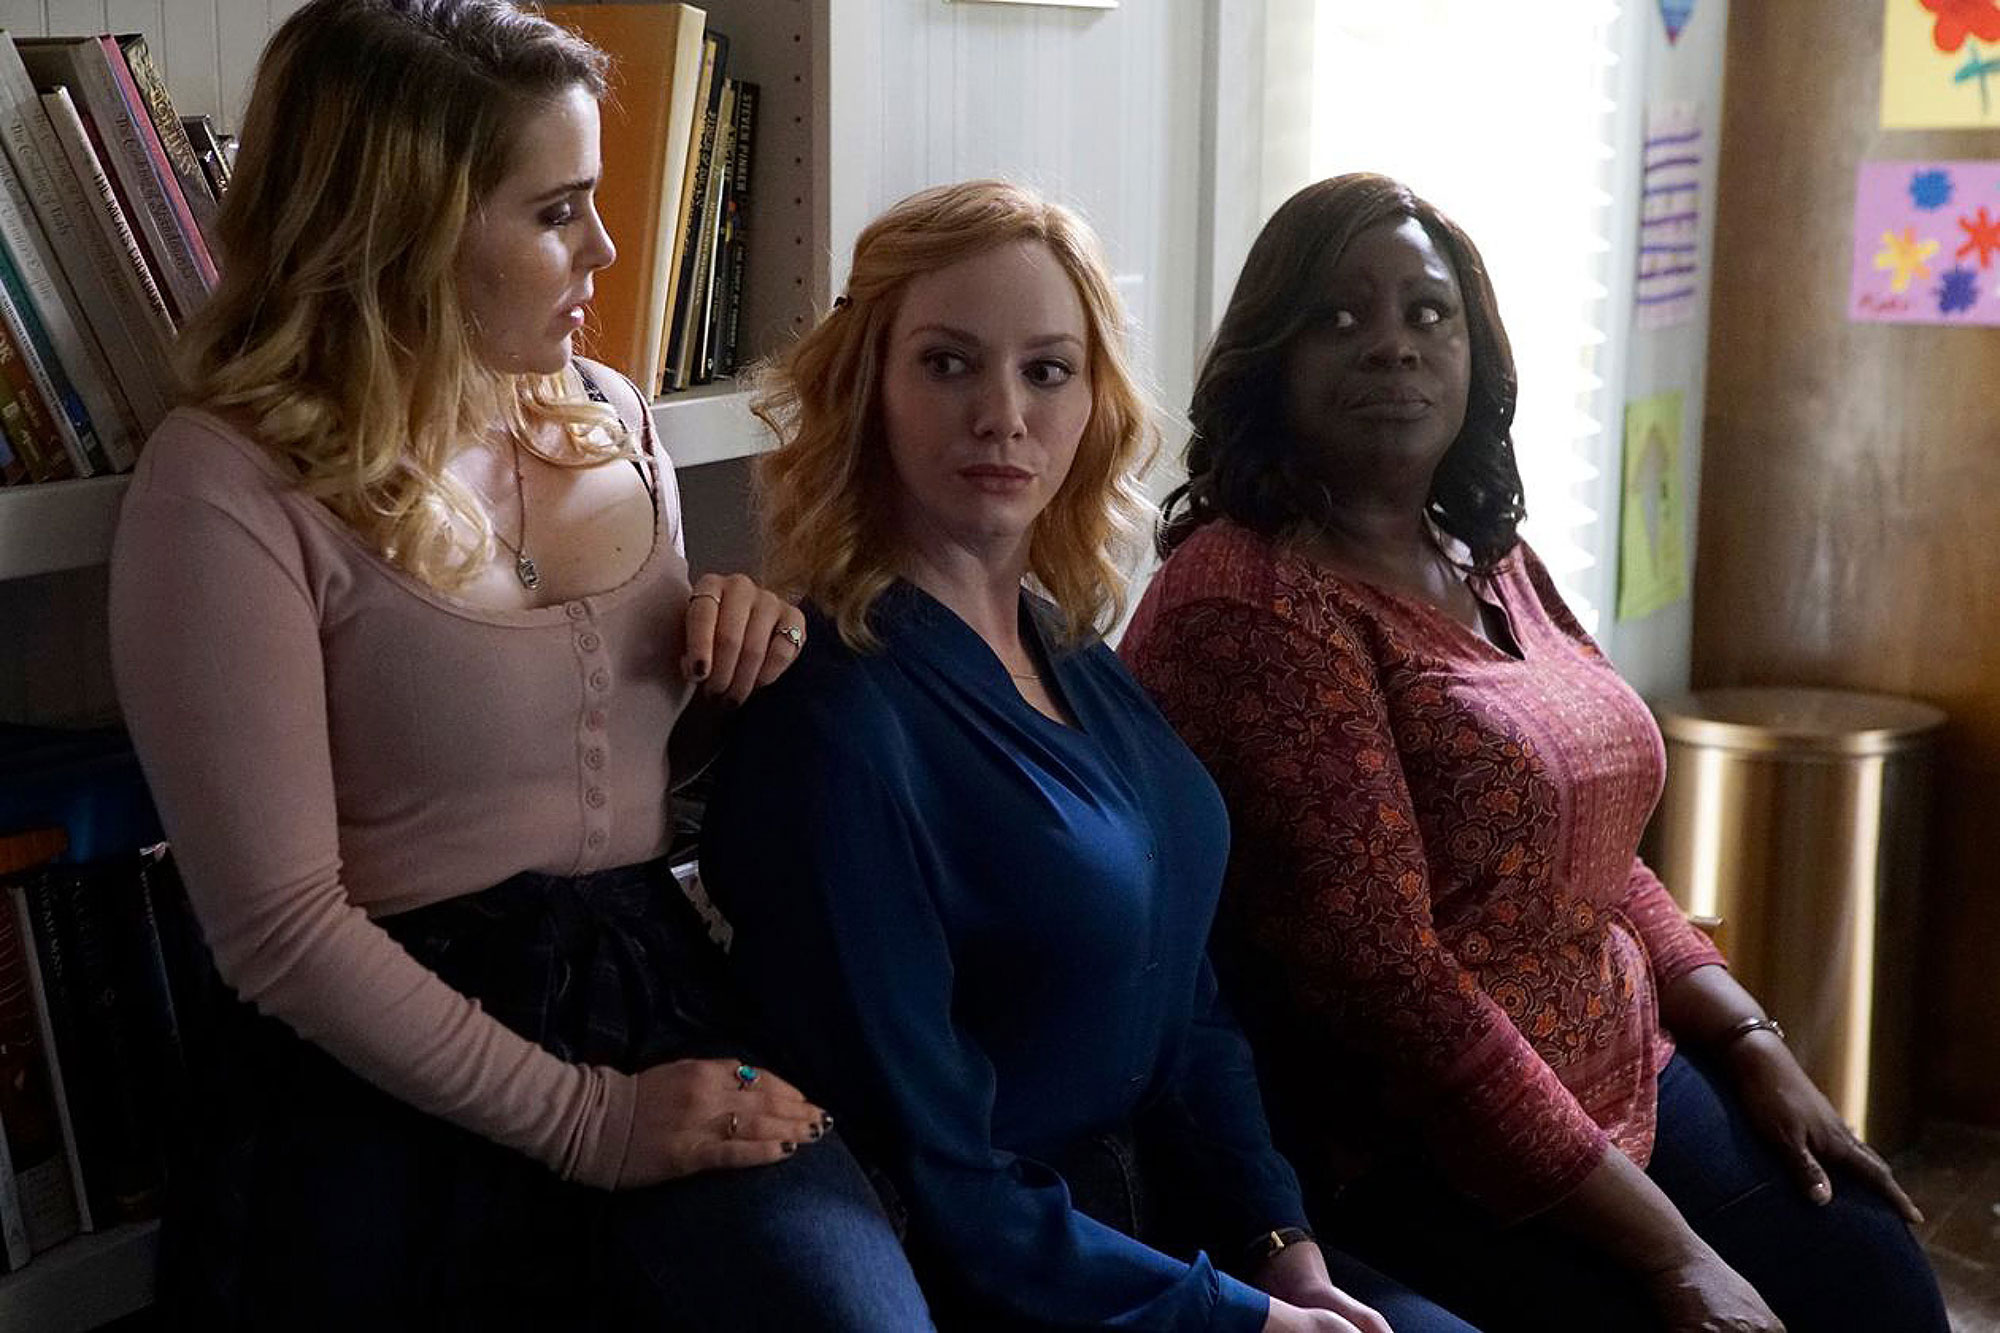 The 'Good Girls' Series Ending, Explained: Here's What to Know (SPOILERS)